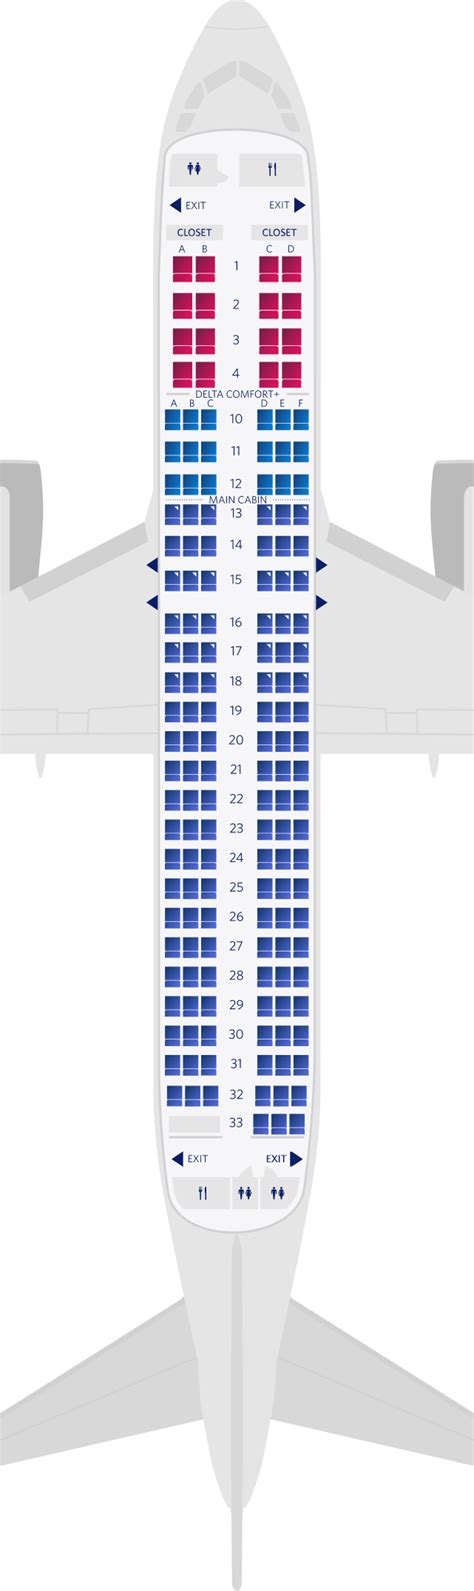 Delta Air Seating Map Elcho Table